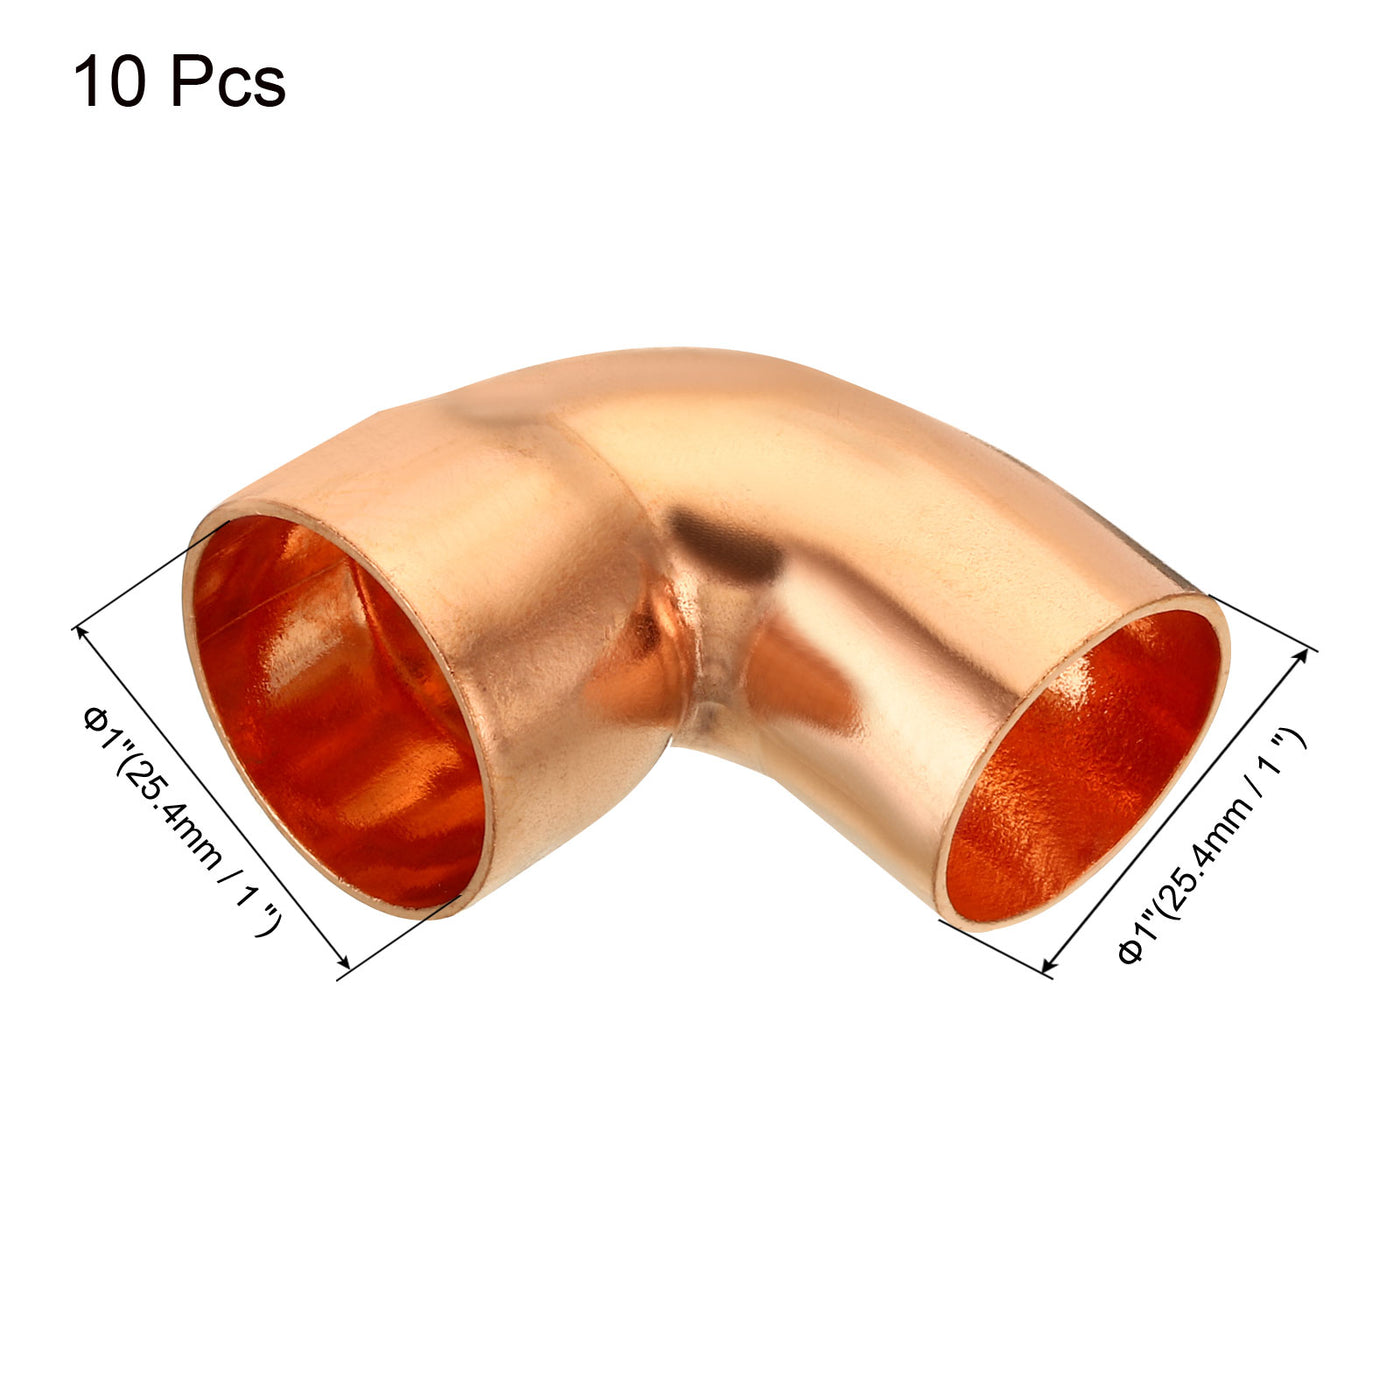 Harfington 90 Degrees Elbow Copper Pipe Fitting Short Turn Welding Connection 1 Inch ID for HVAC Air Conditioning Pipe, Pack of 10